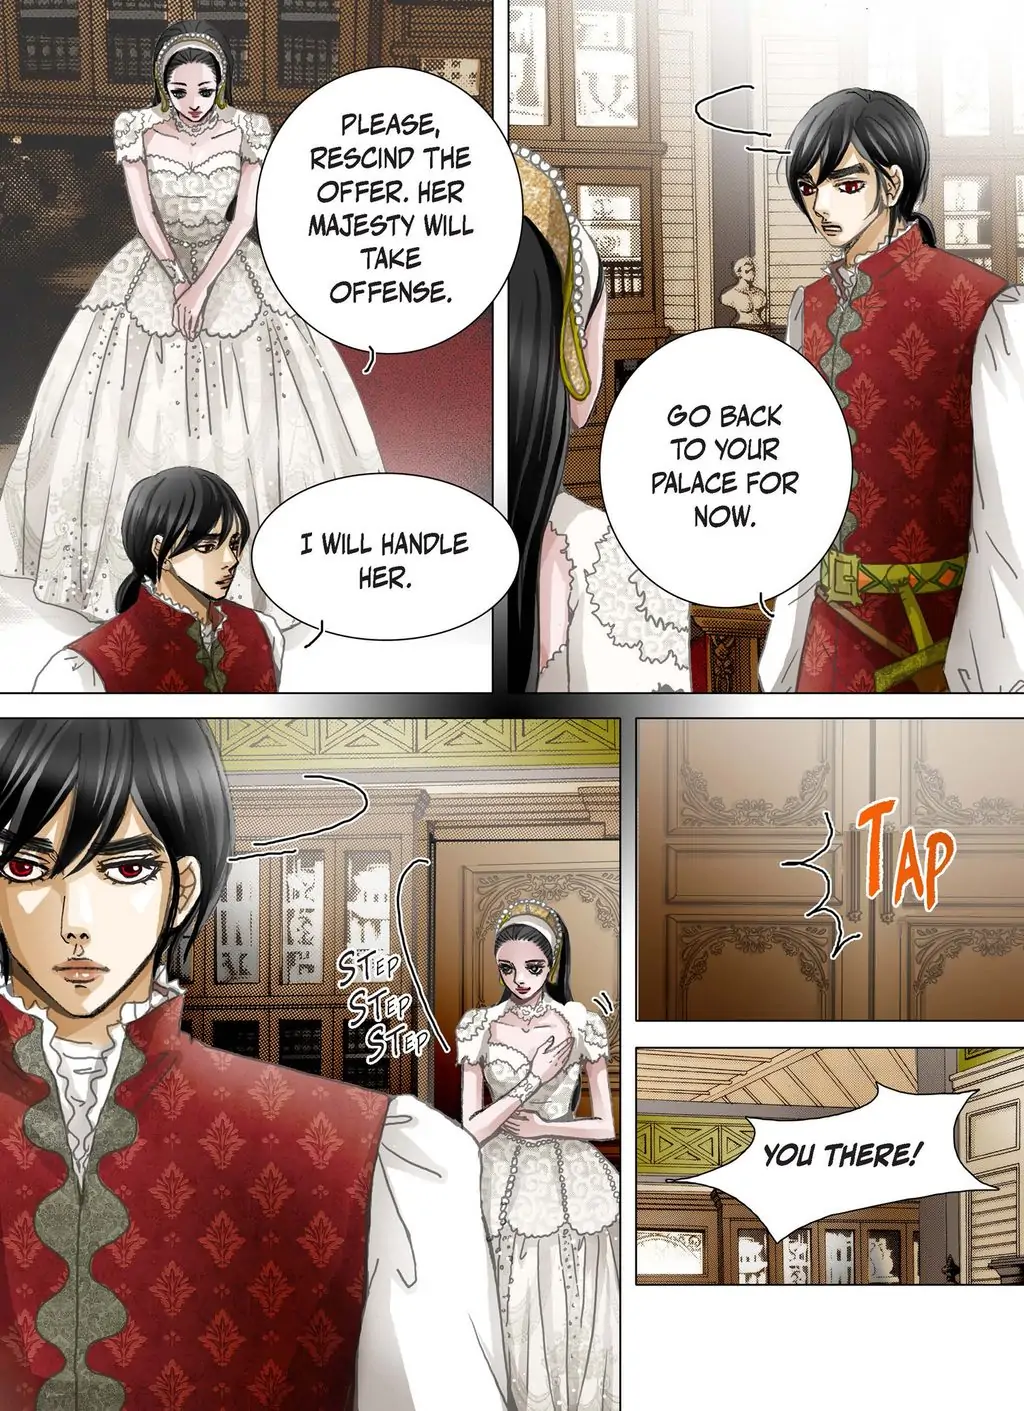 The Emperor’s Woman chapter 51